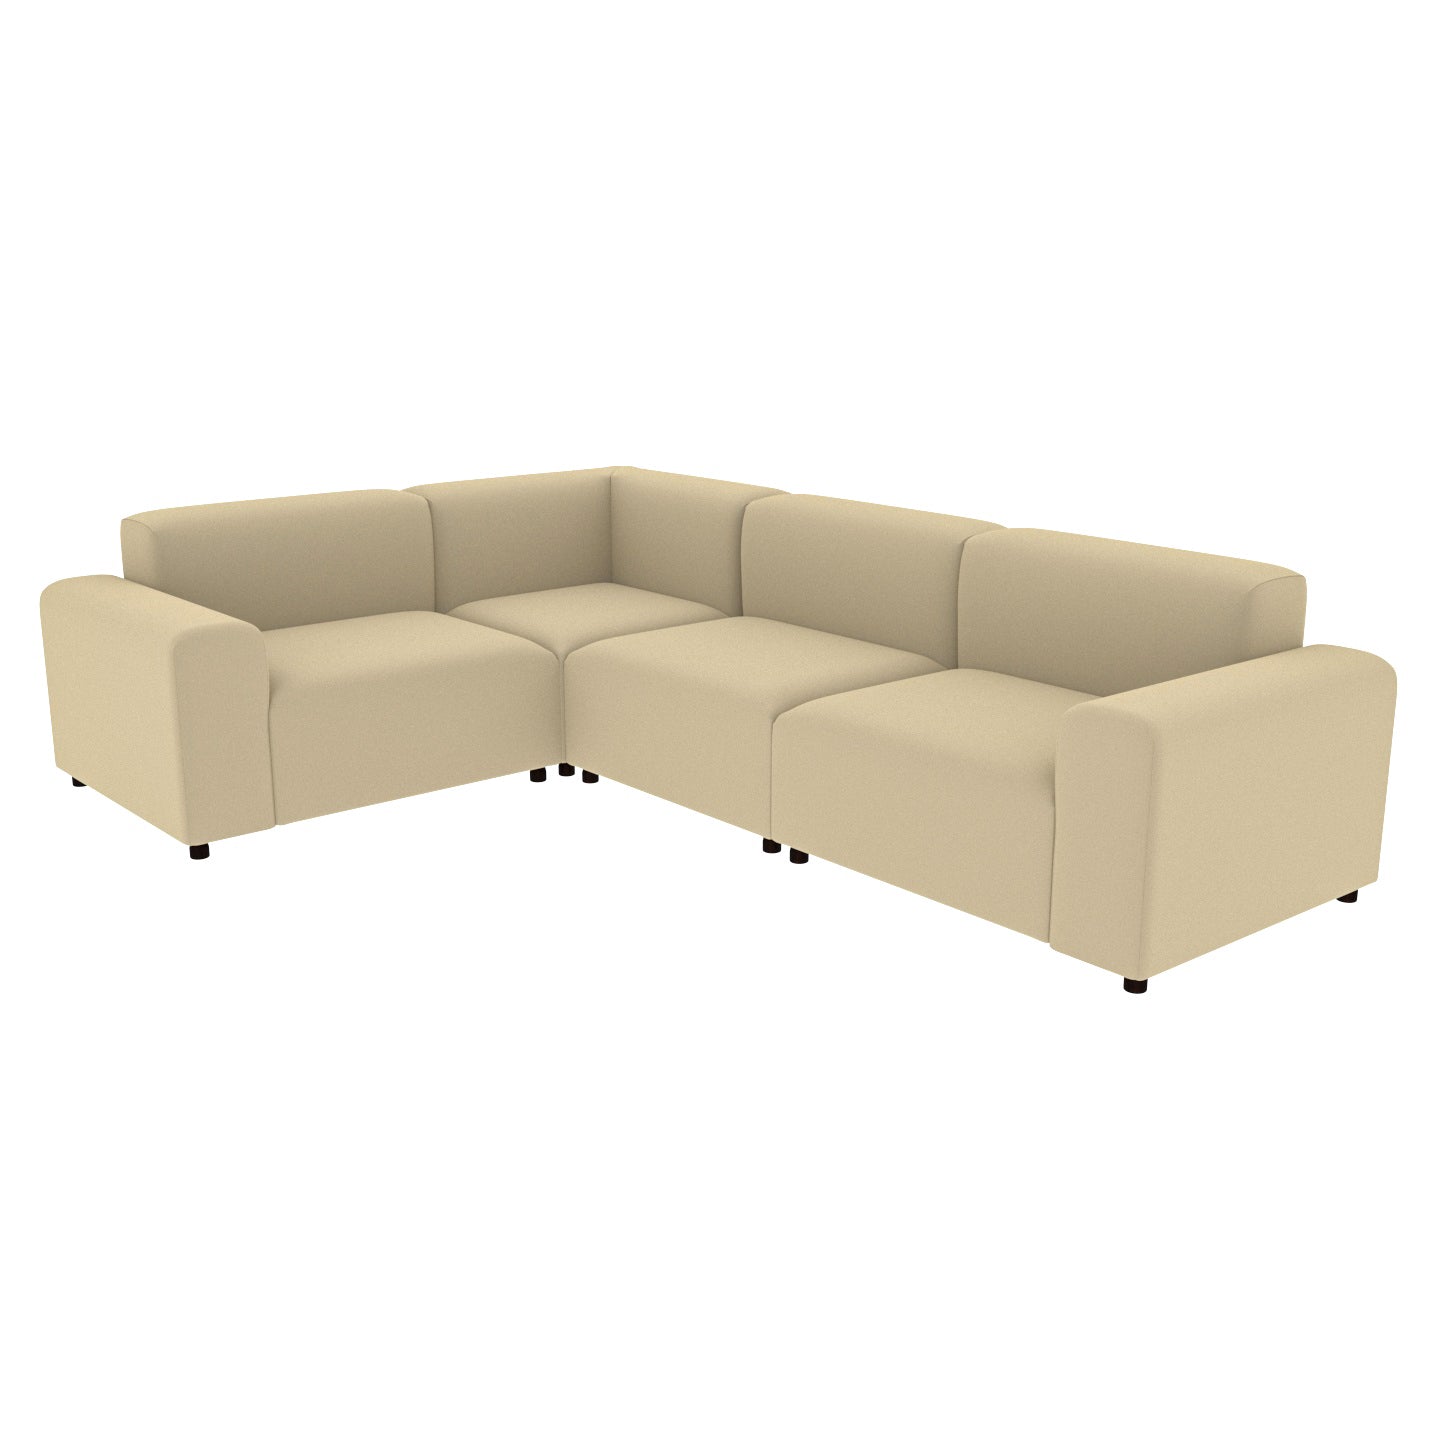 Better Blonde Pastel Coloured Comfort Long L Shaped 4 Seater Sofa for Home Sofa